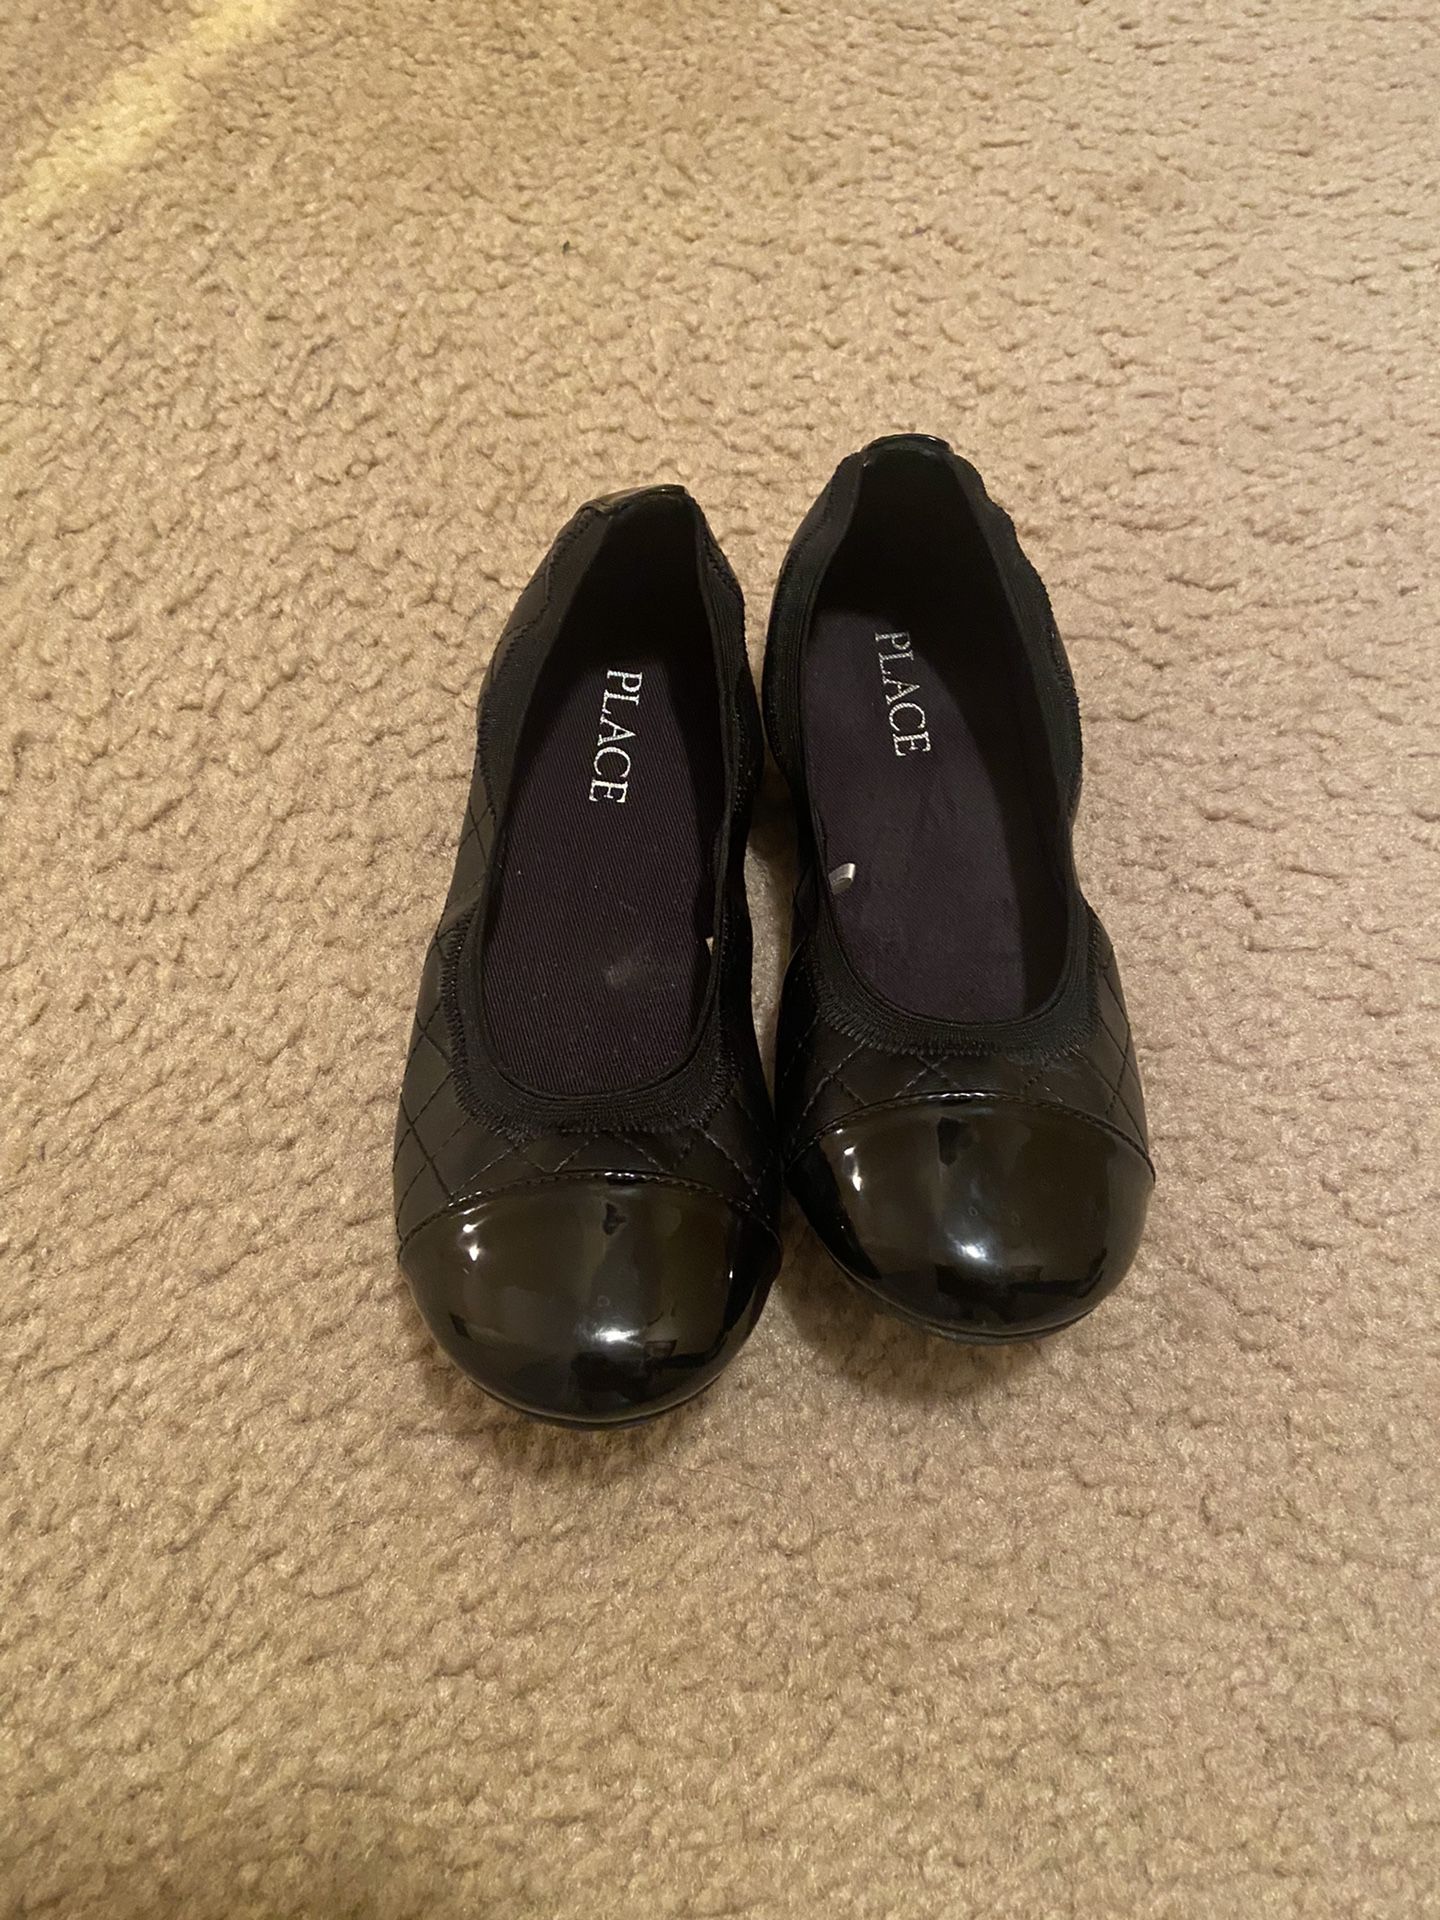 Children’s Place Girls Shoes Size 13